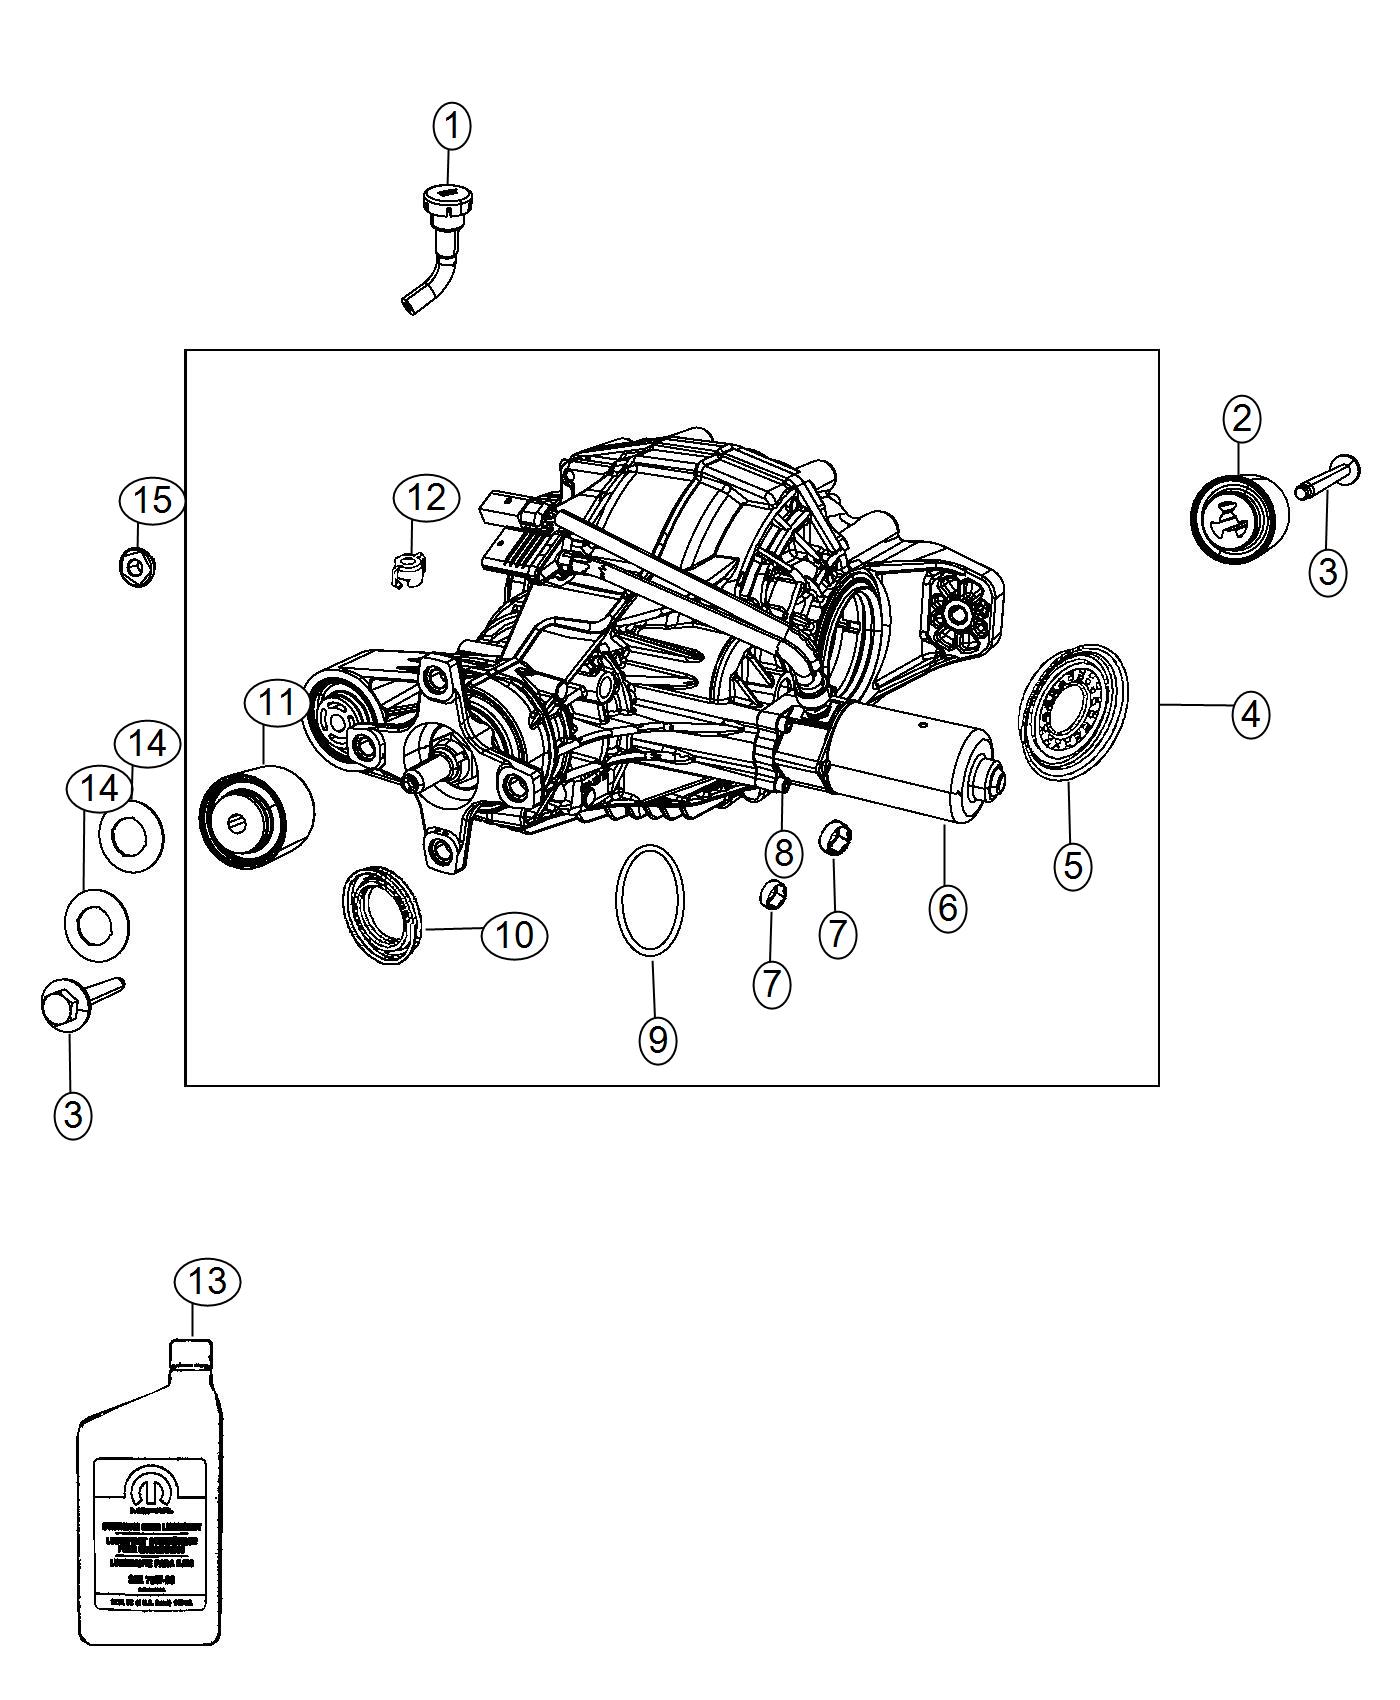 Axle Assembly and Components, With [Elec LTD Slip Differential Rr Axle]. Diagram